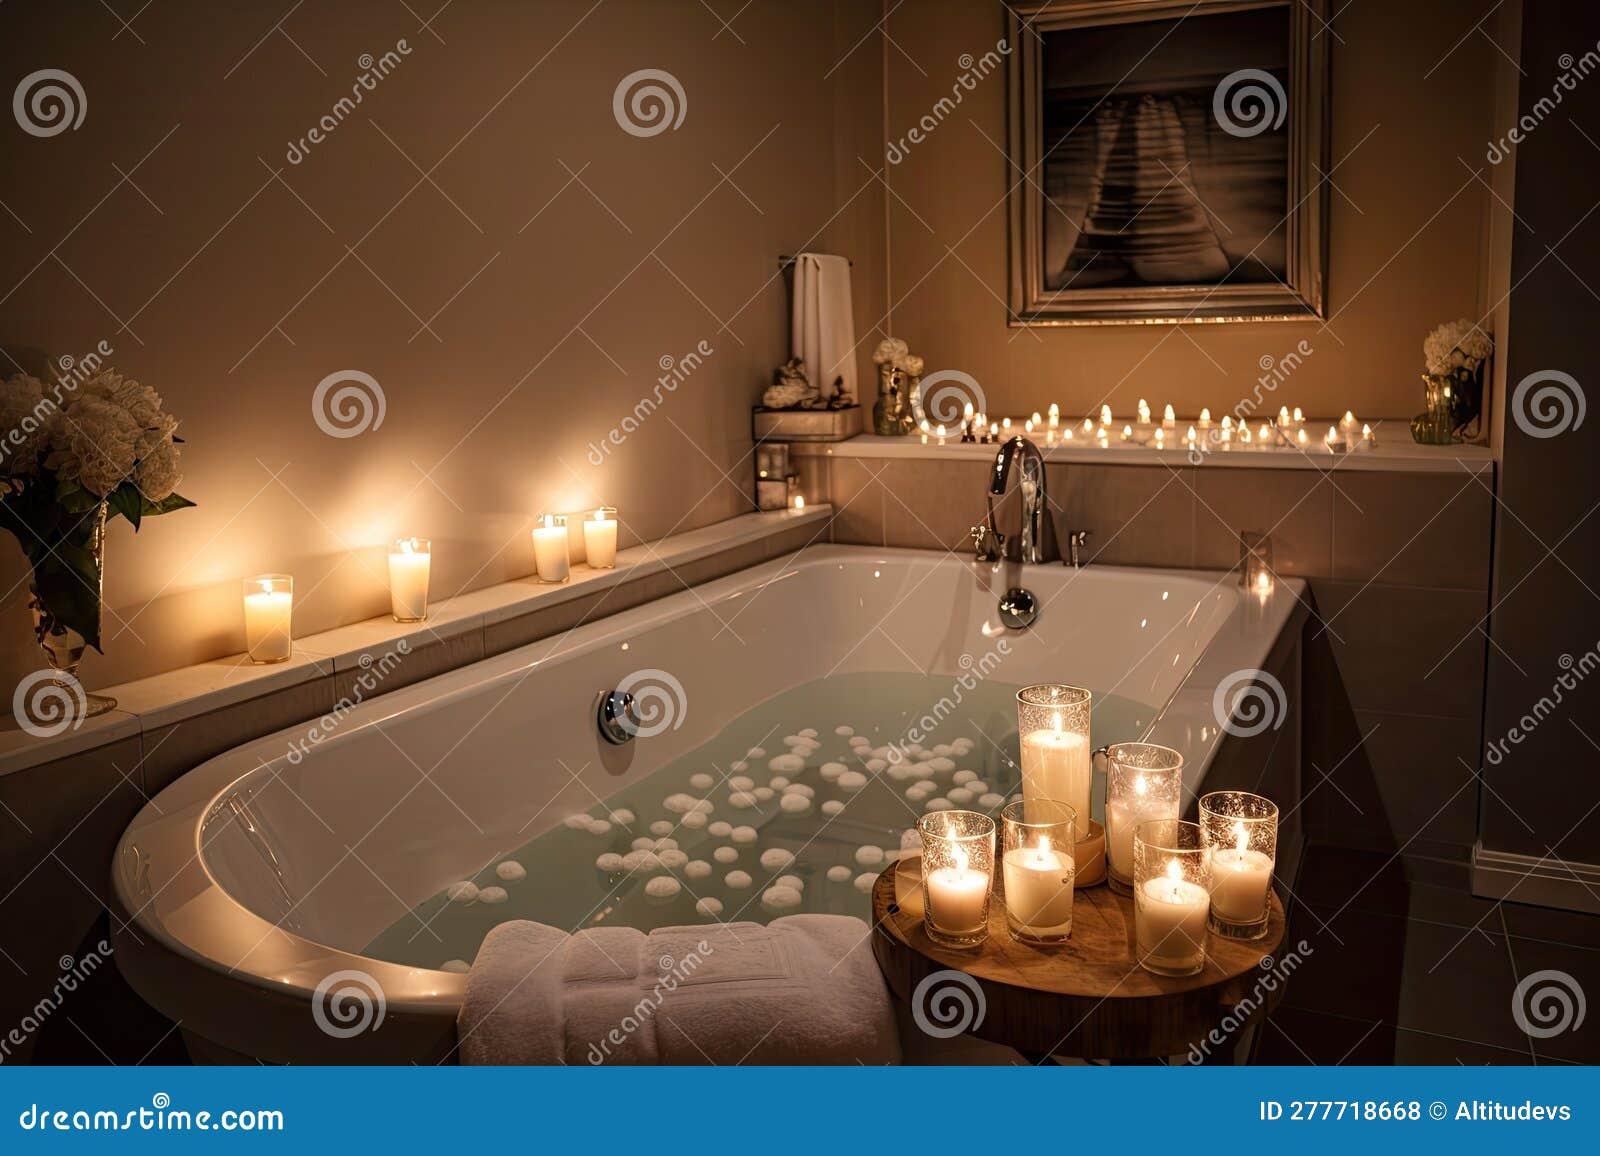 https://thumbs.dreamstime.com/z/bathroom-steamy-bubble-bath-candles-peaceful-relaxing-escape-bathroom-steamy-bubble-bath-candles-277718668.jpg